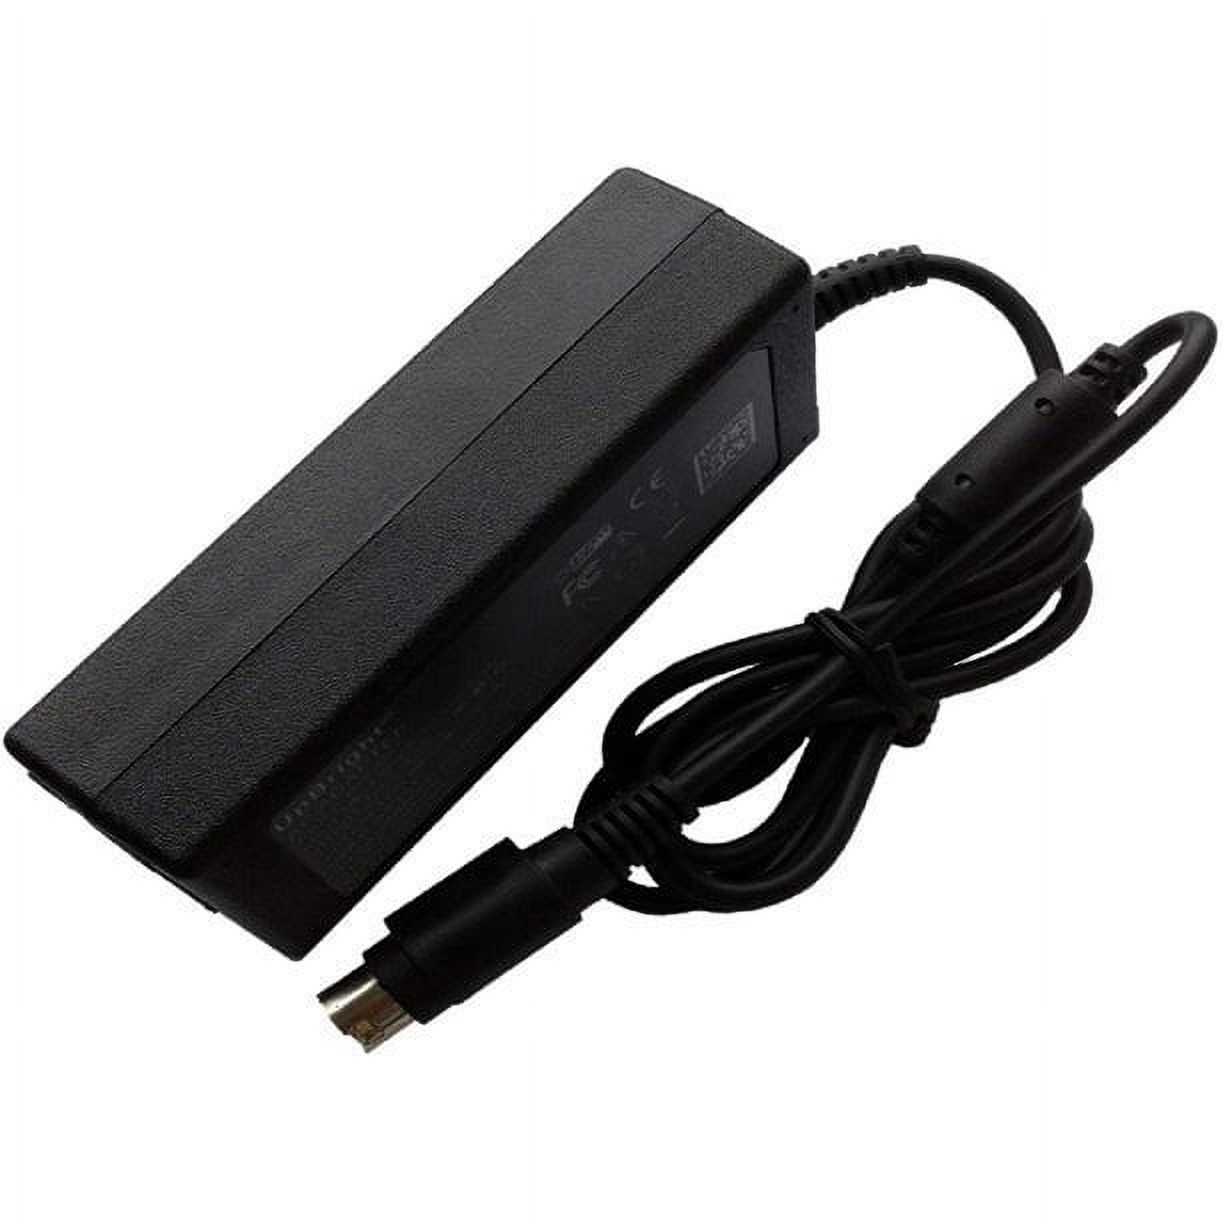 UpBright 3-Pin 12V AC/DC Adapter Compatible with Skyworth SLC-1921A SLC-1921A-3S SLC-1519A-3M SLC-1519A-3S SLC-1369A-3C SLC-1369A-3S SLC-1369A-3 SLC1369A3 SLC-1569A SLC-1569A-3 LED HD TV 533Z0905063PI - image 5 of 5